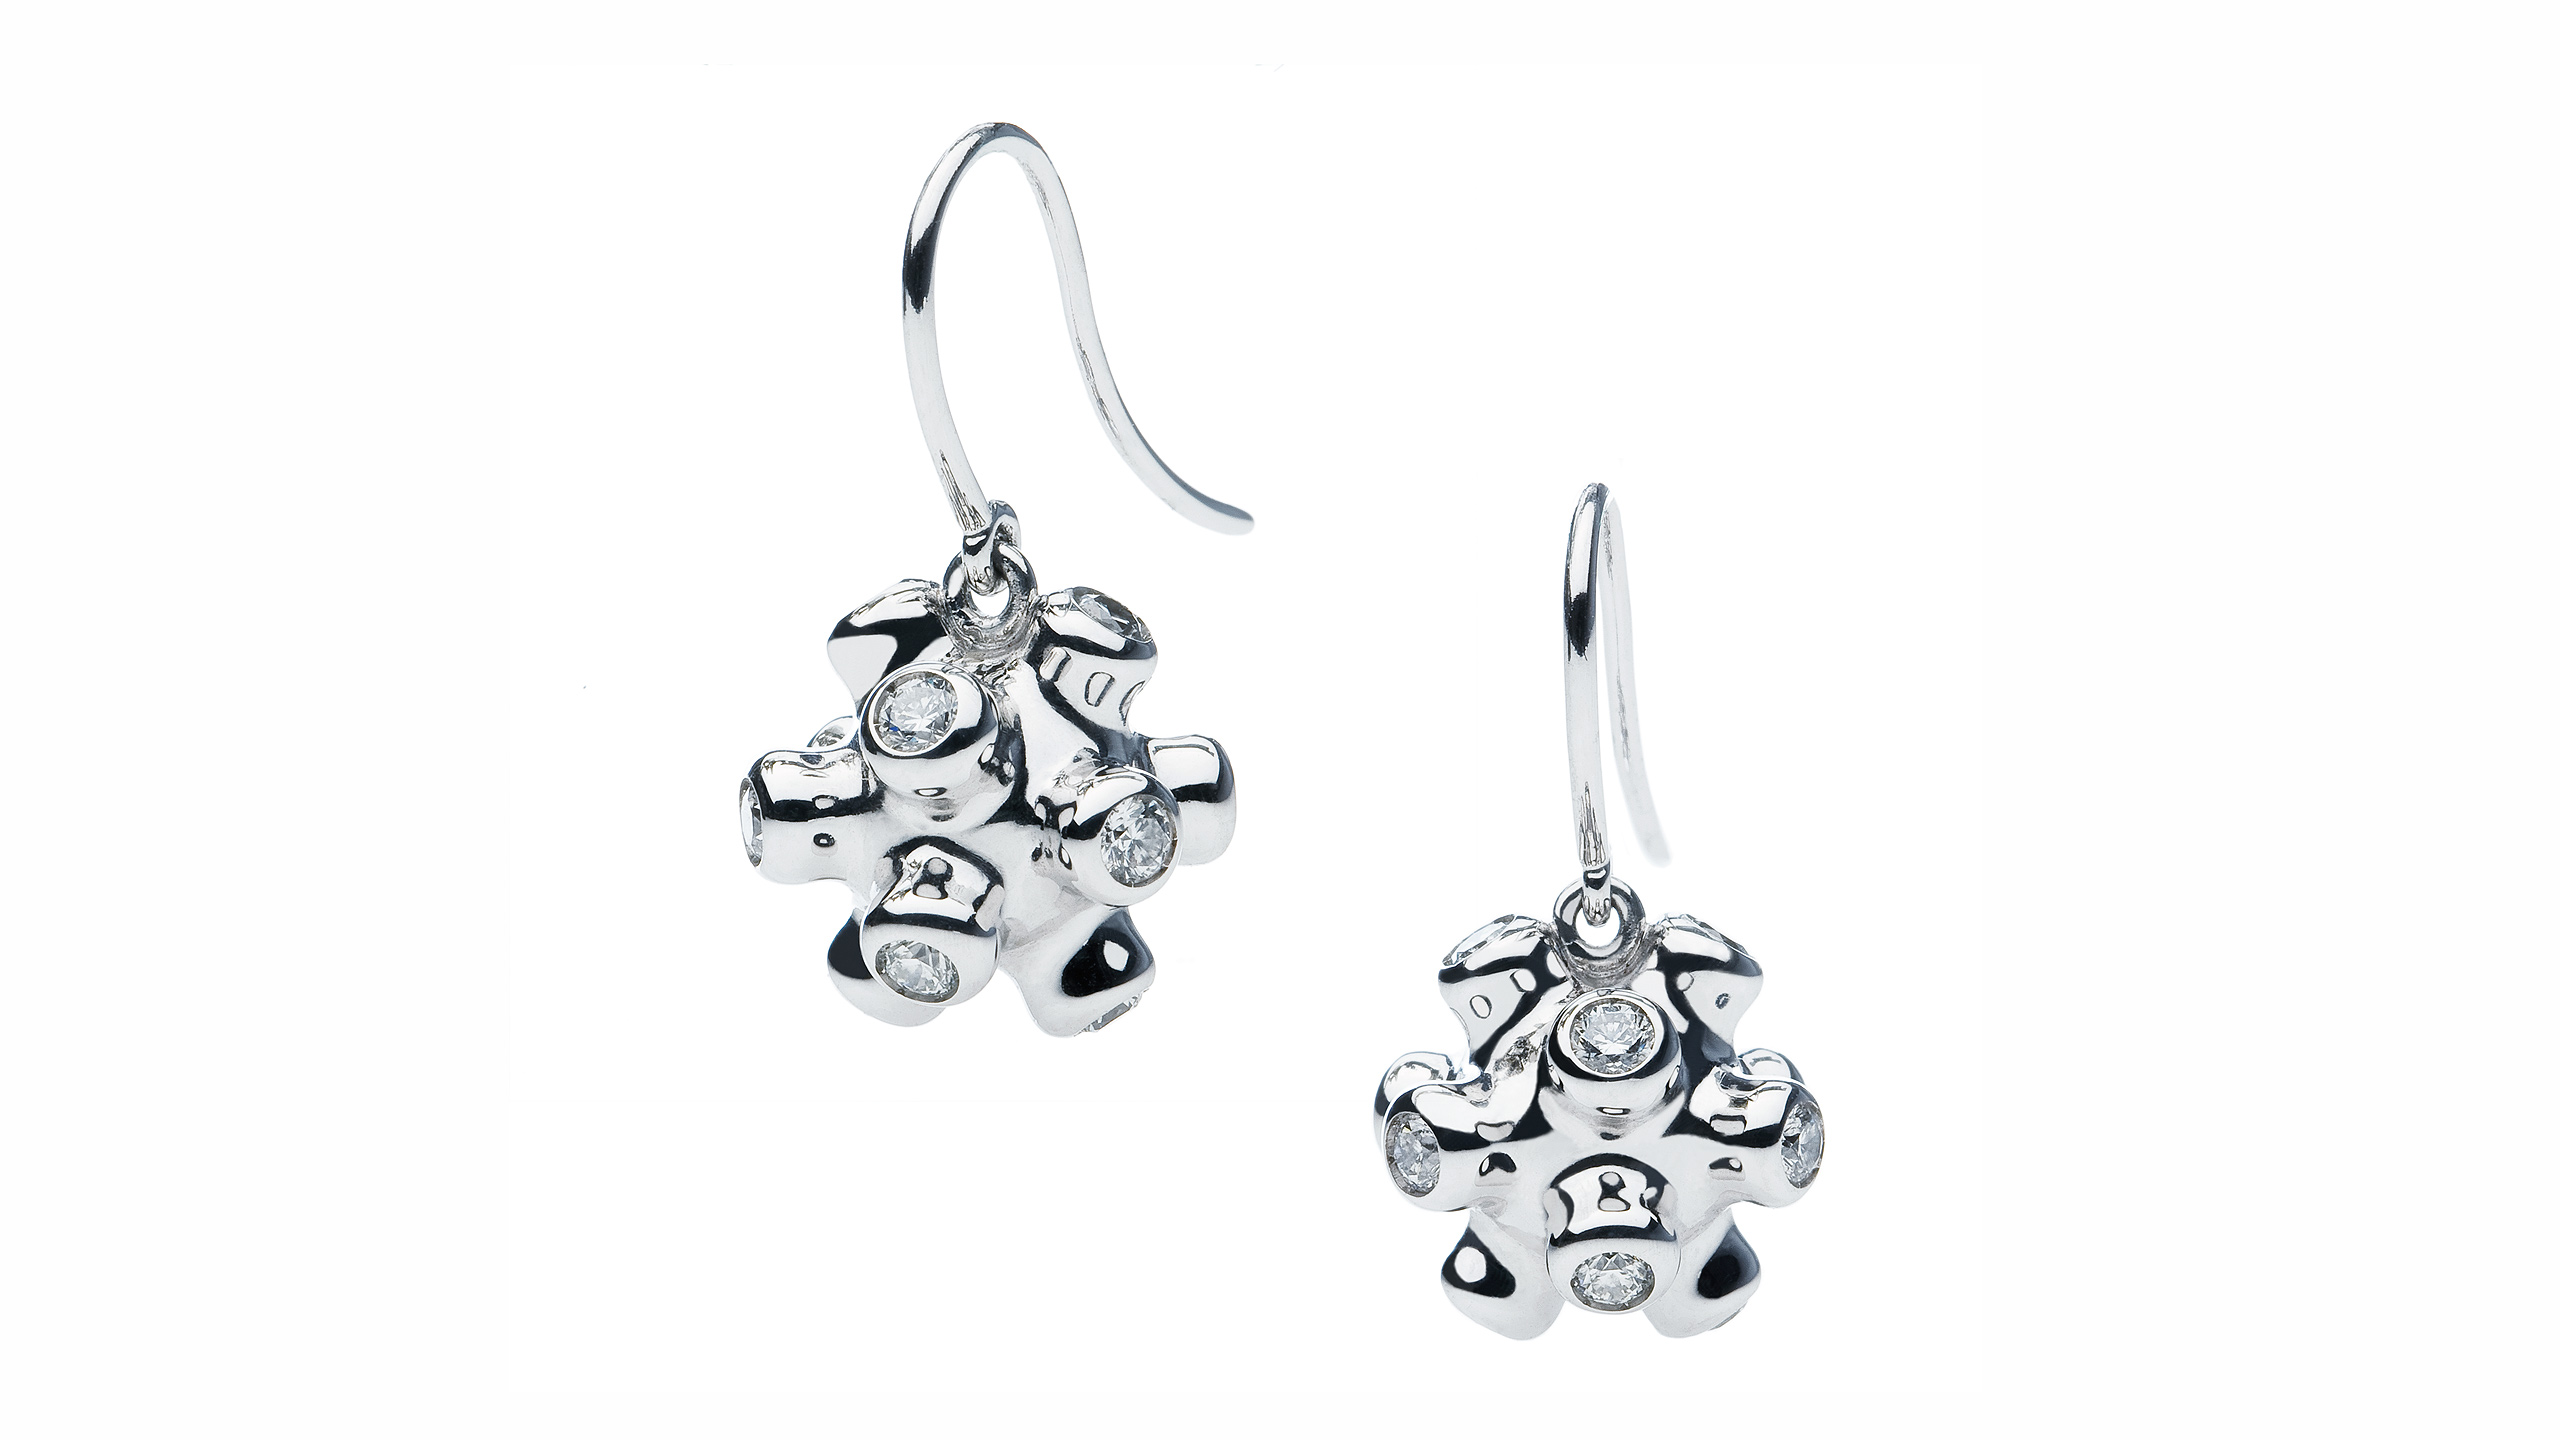 https://towejewels.com/wp-content/uploads/2012/08/Harmony-earrings_pair_20110217_0049_OK_2560_Overview_Web.jpg